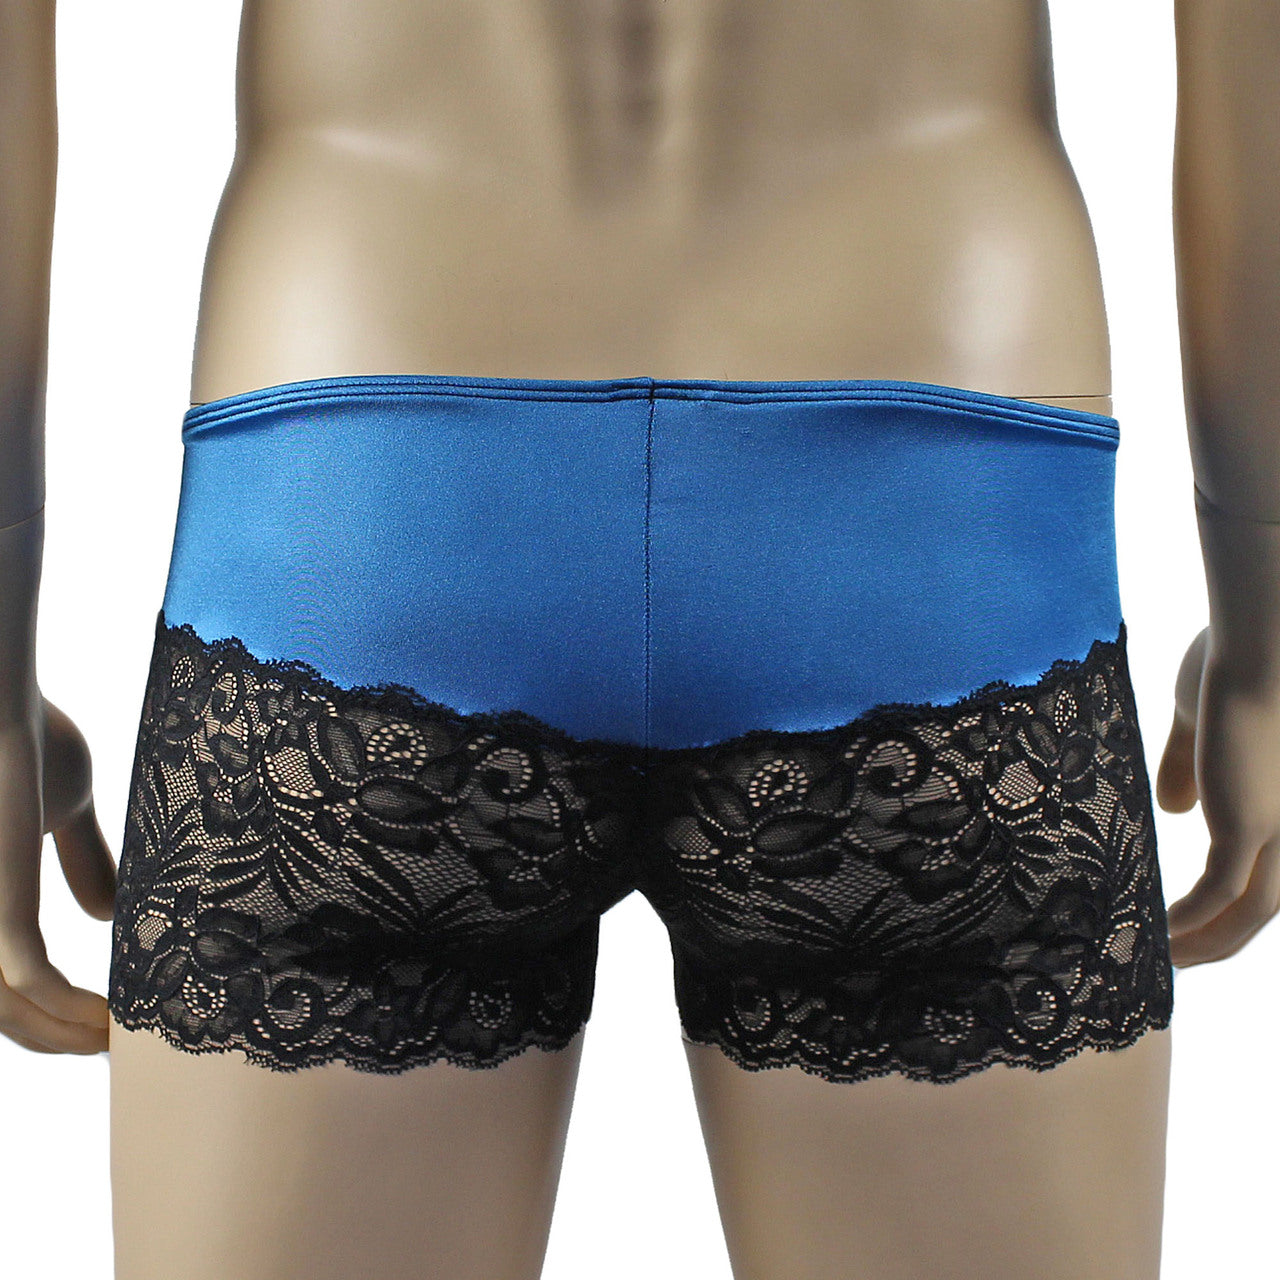 Mens Risque Boxer Briefs (teal and black plus other colours)